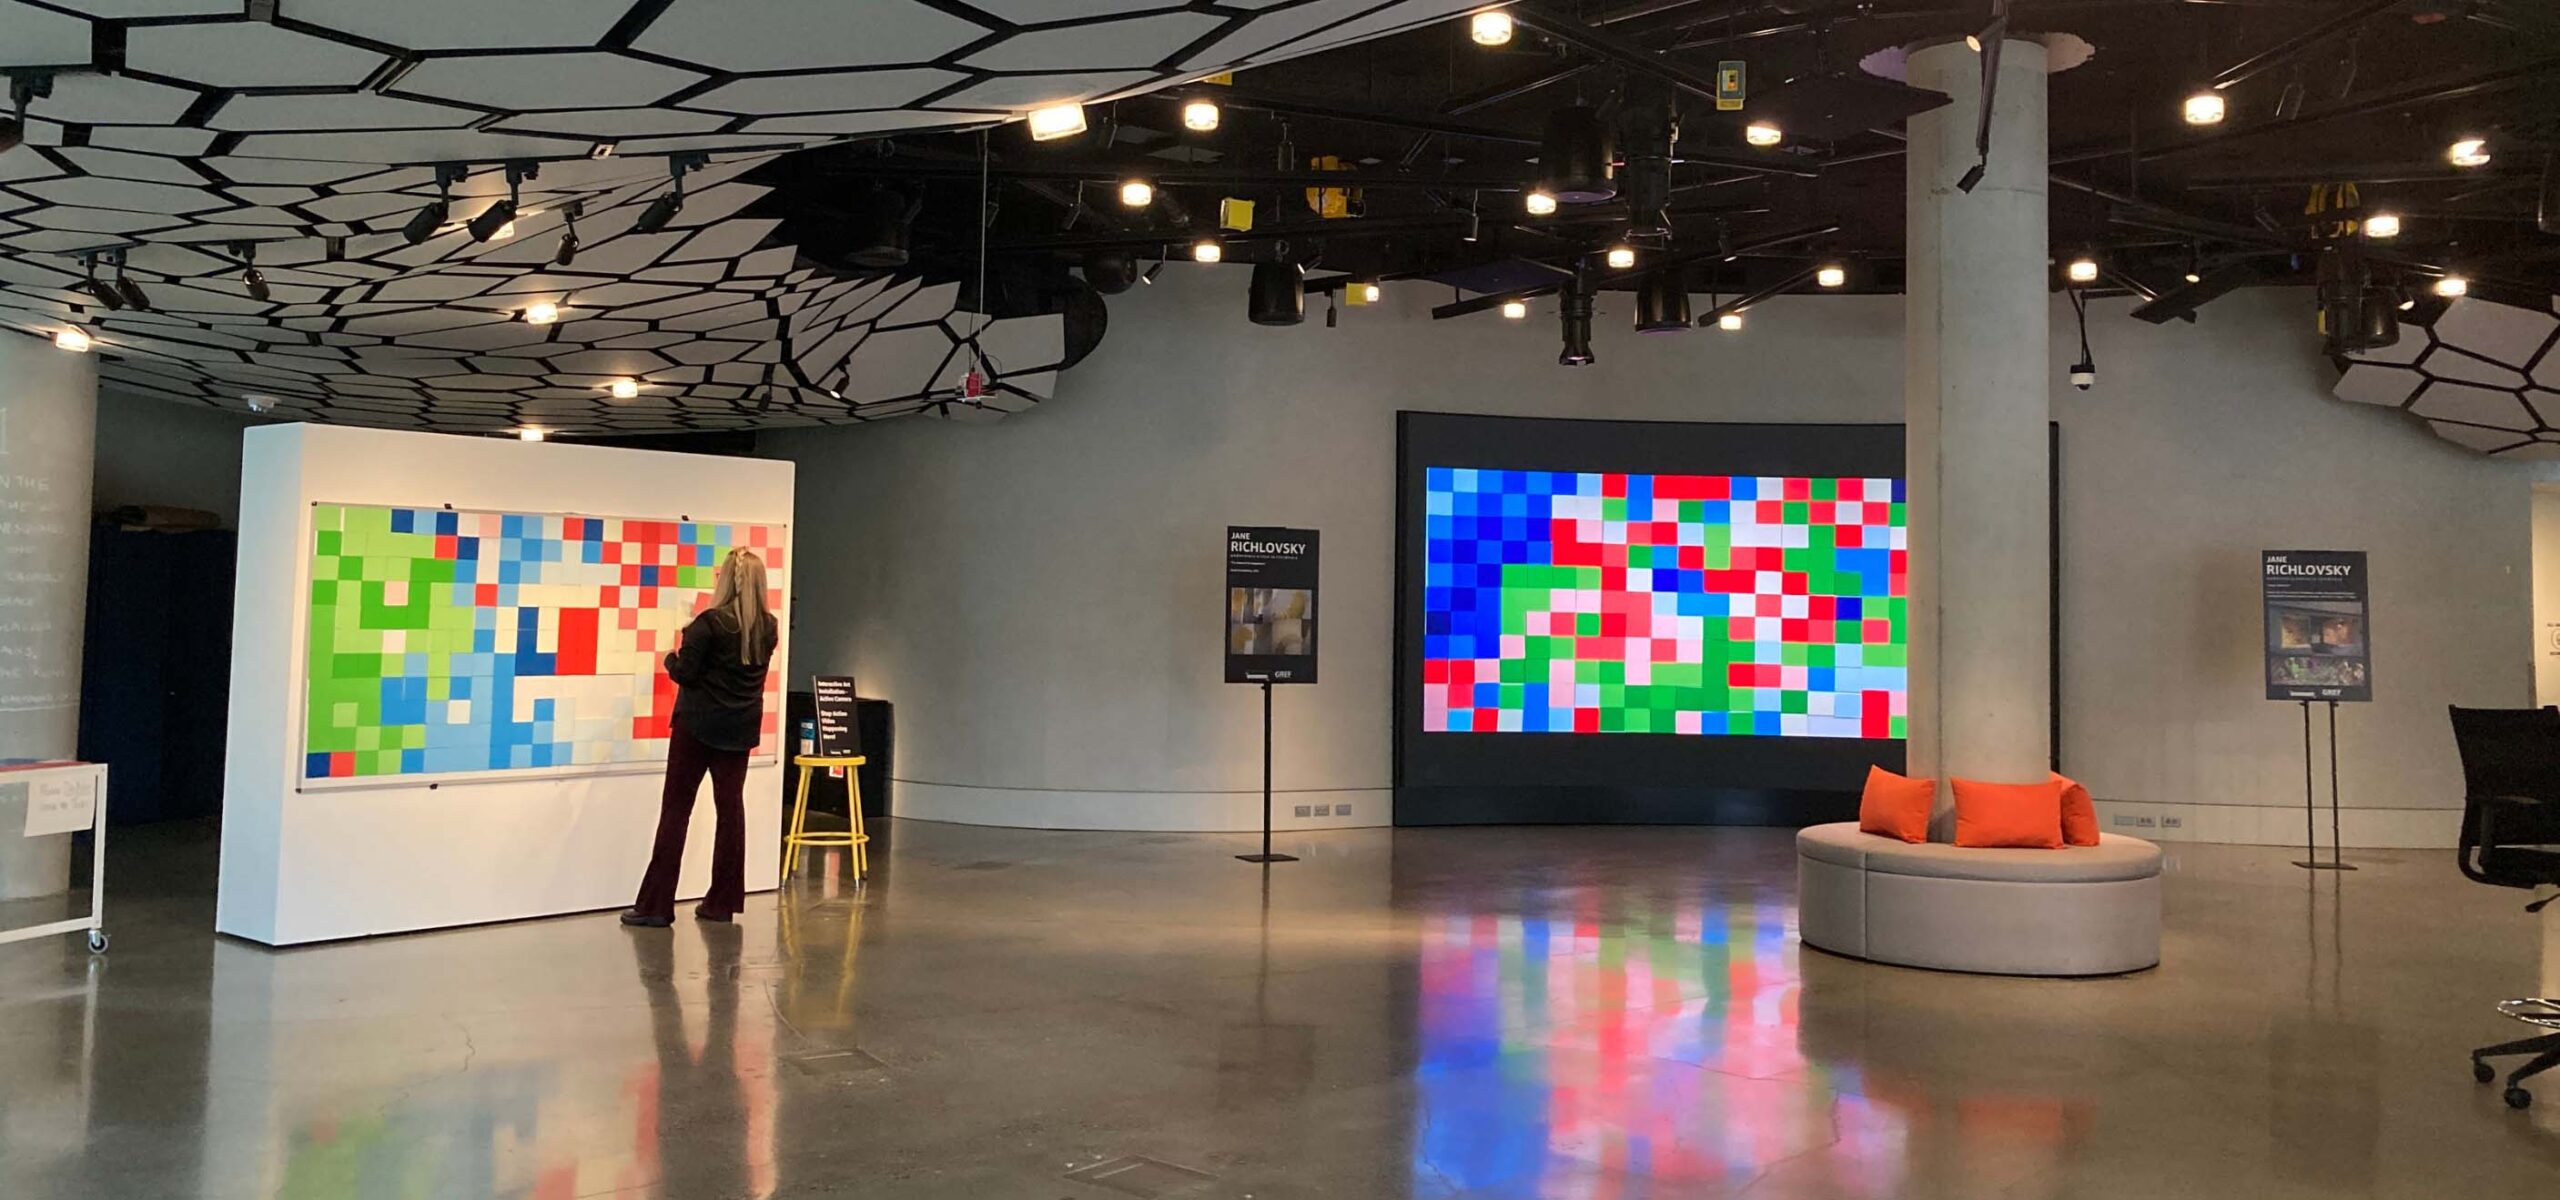 A woman standing in front of a giant pixel art display.